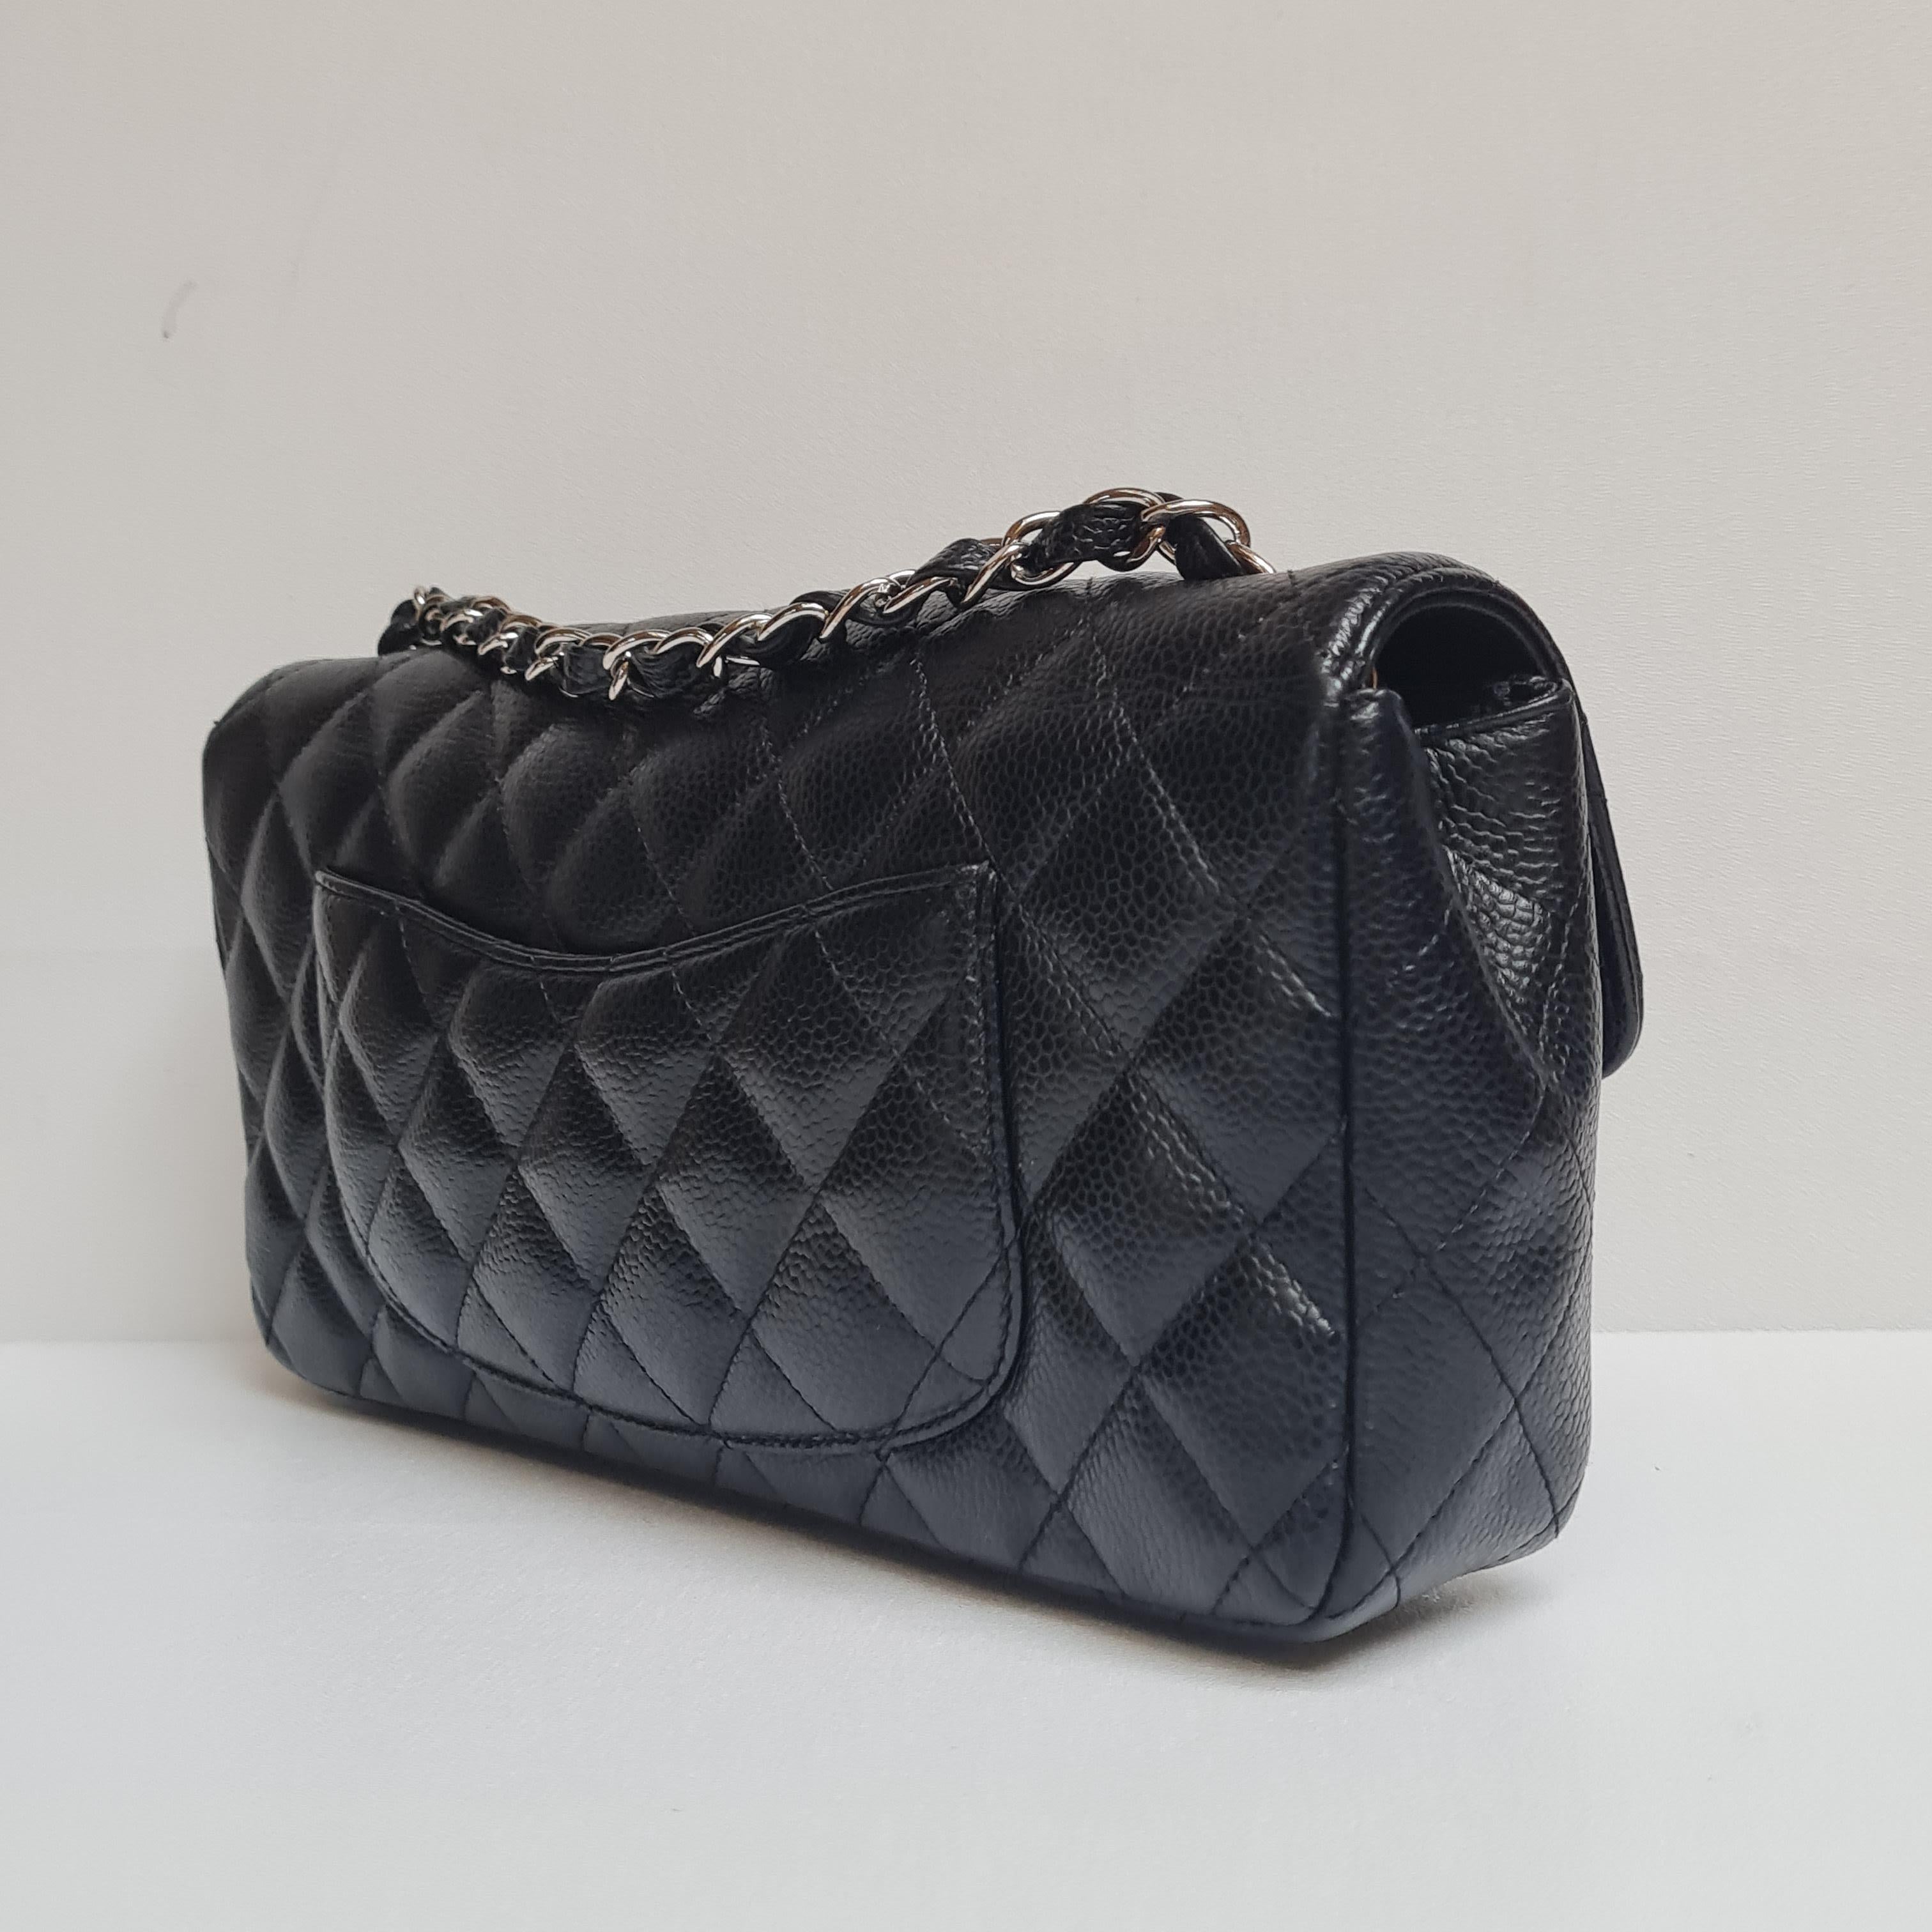 Chanel Black Caviar Quilted East West SHW Flap Bag 1